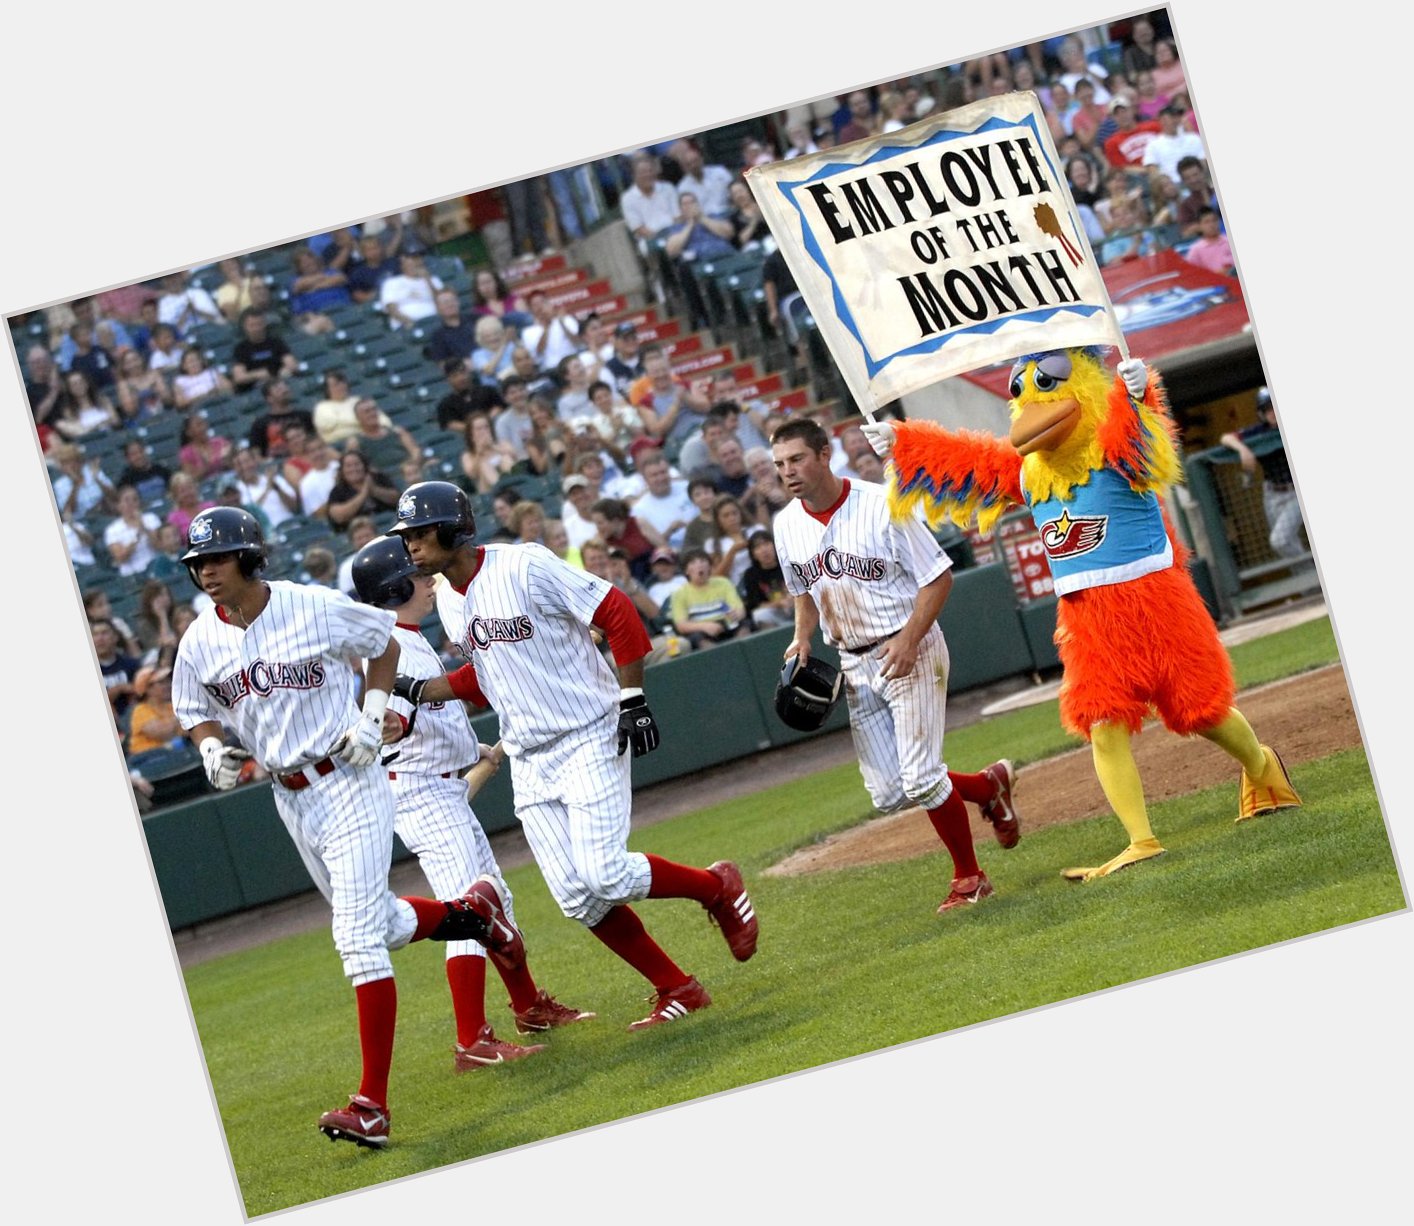 Happy Birthday to 2007 BlueClaws OF and Employee of the Month Quintin Berry (left in photo). 